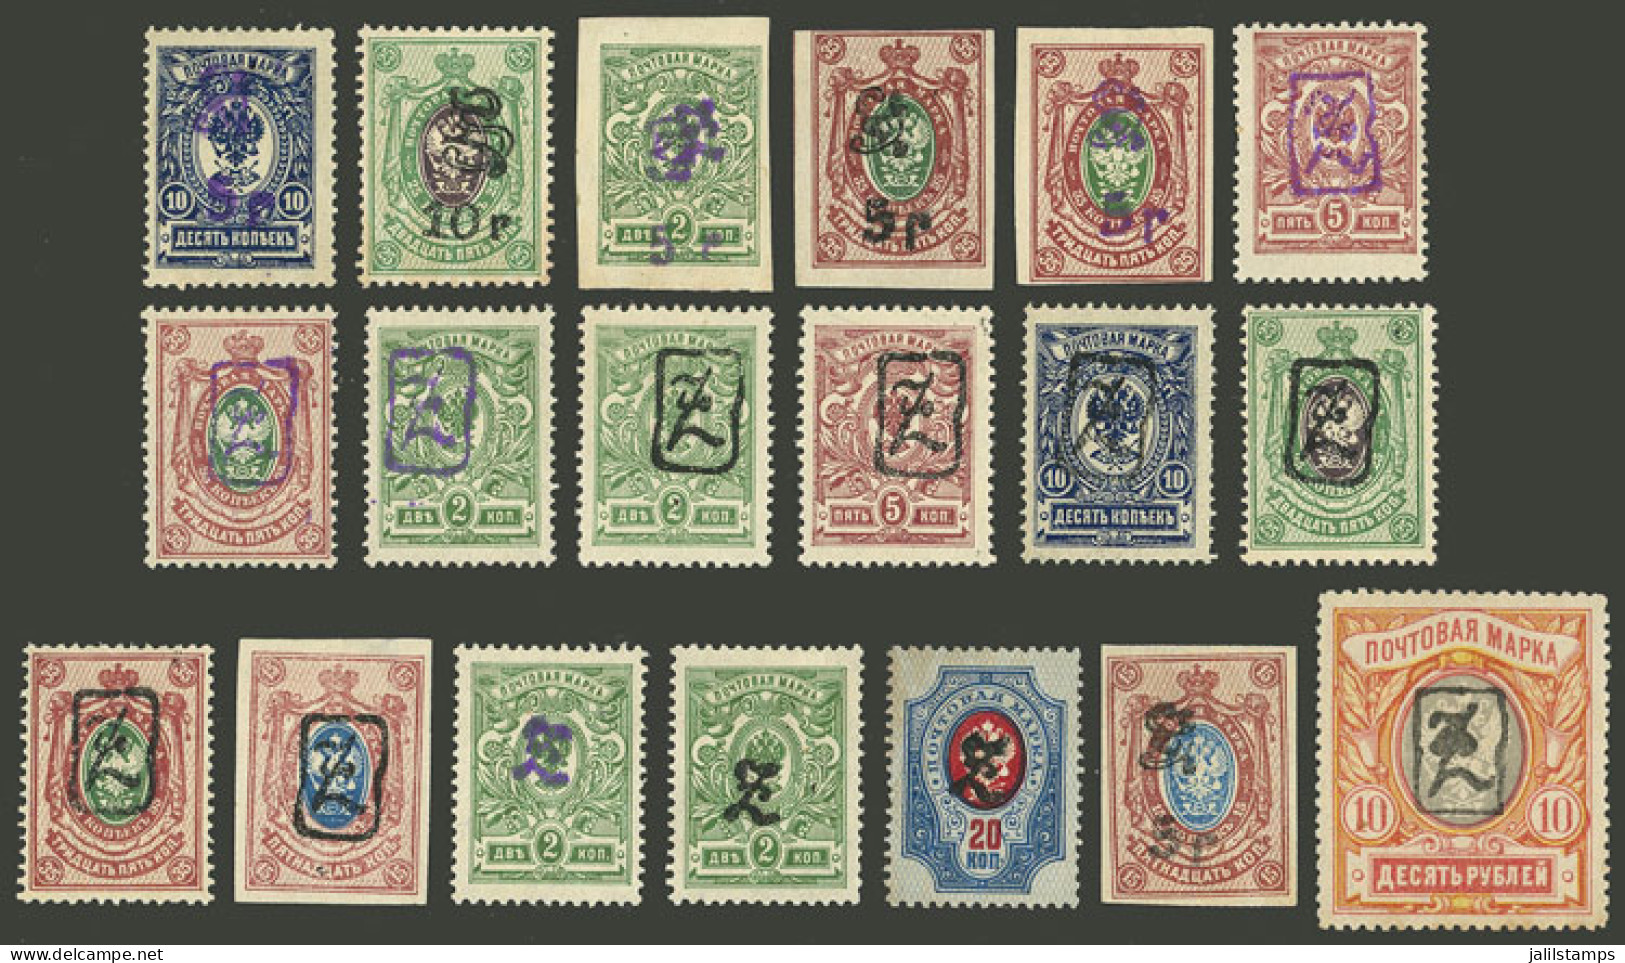 ARMENIA: Lot Of Stamps Overprinted In 1919, Including Good Values, Catalog Value US$150+, Almost All Mint With Original  - Armenien